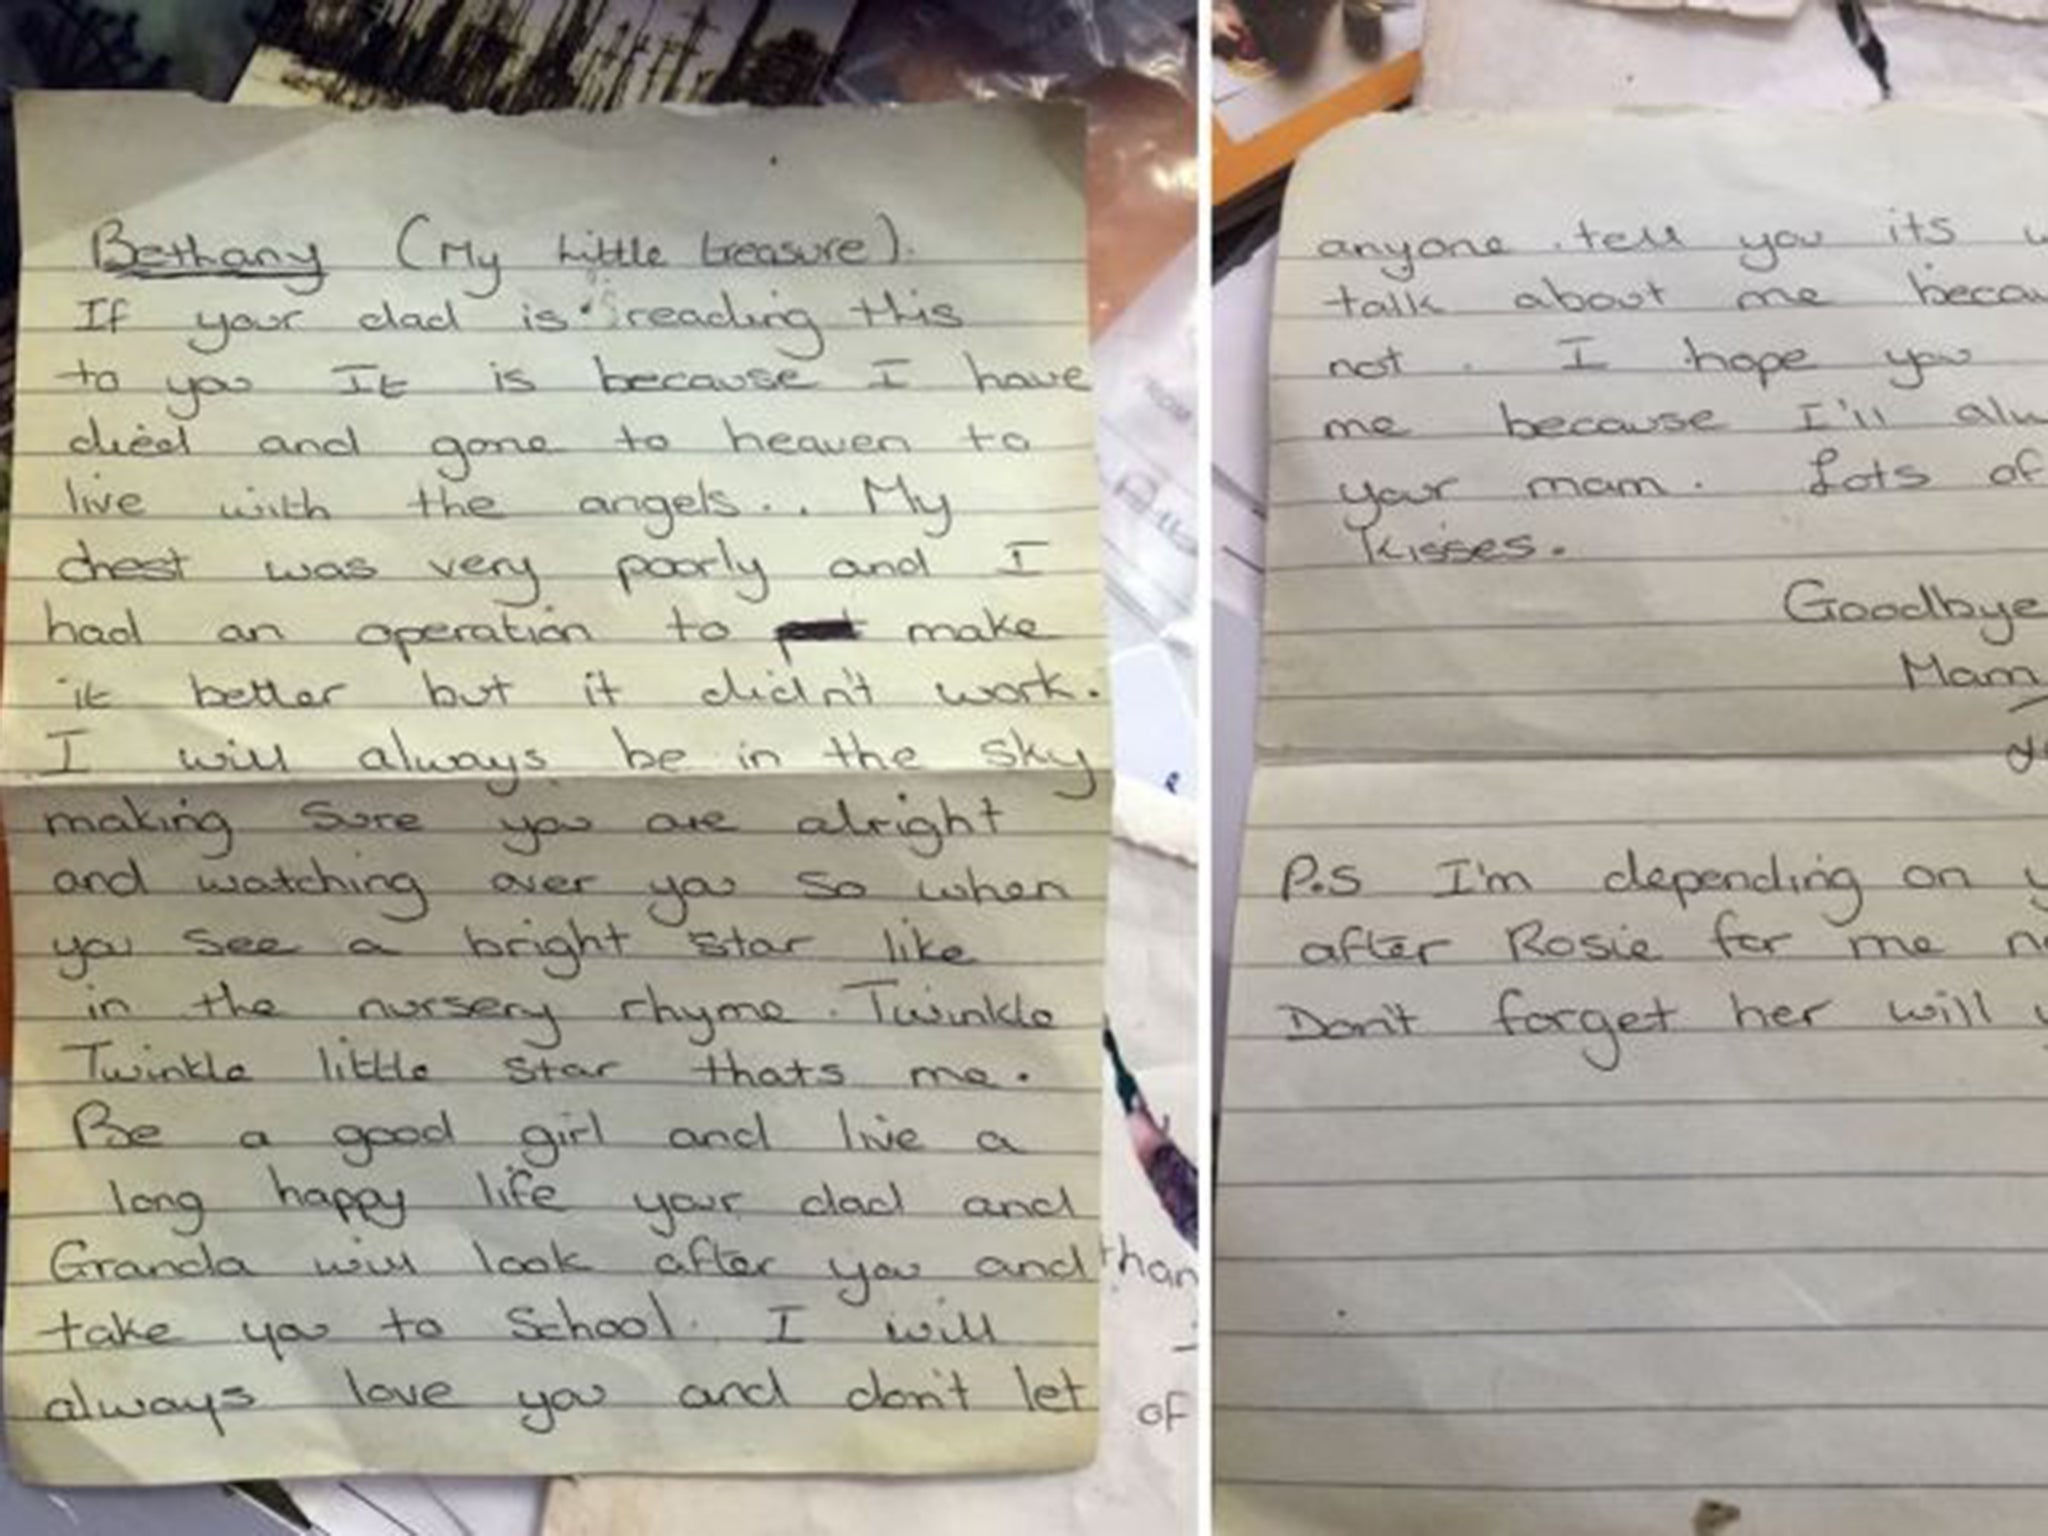 The lost letter from Lisa Gash to her daughter before her death